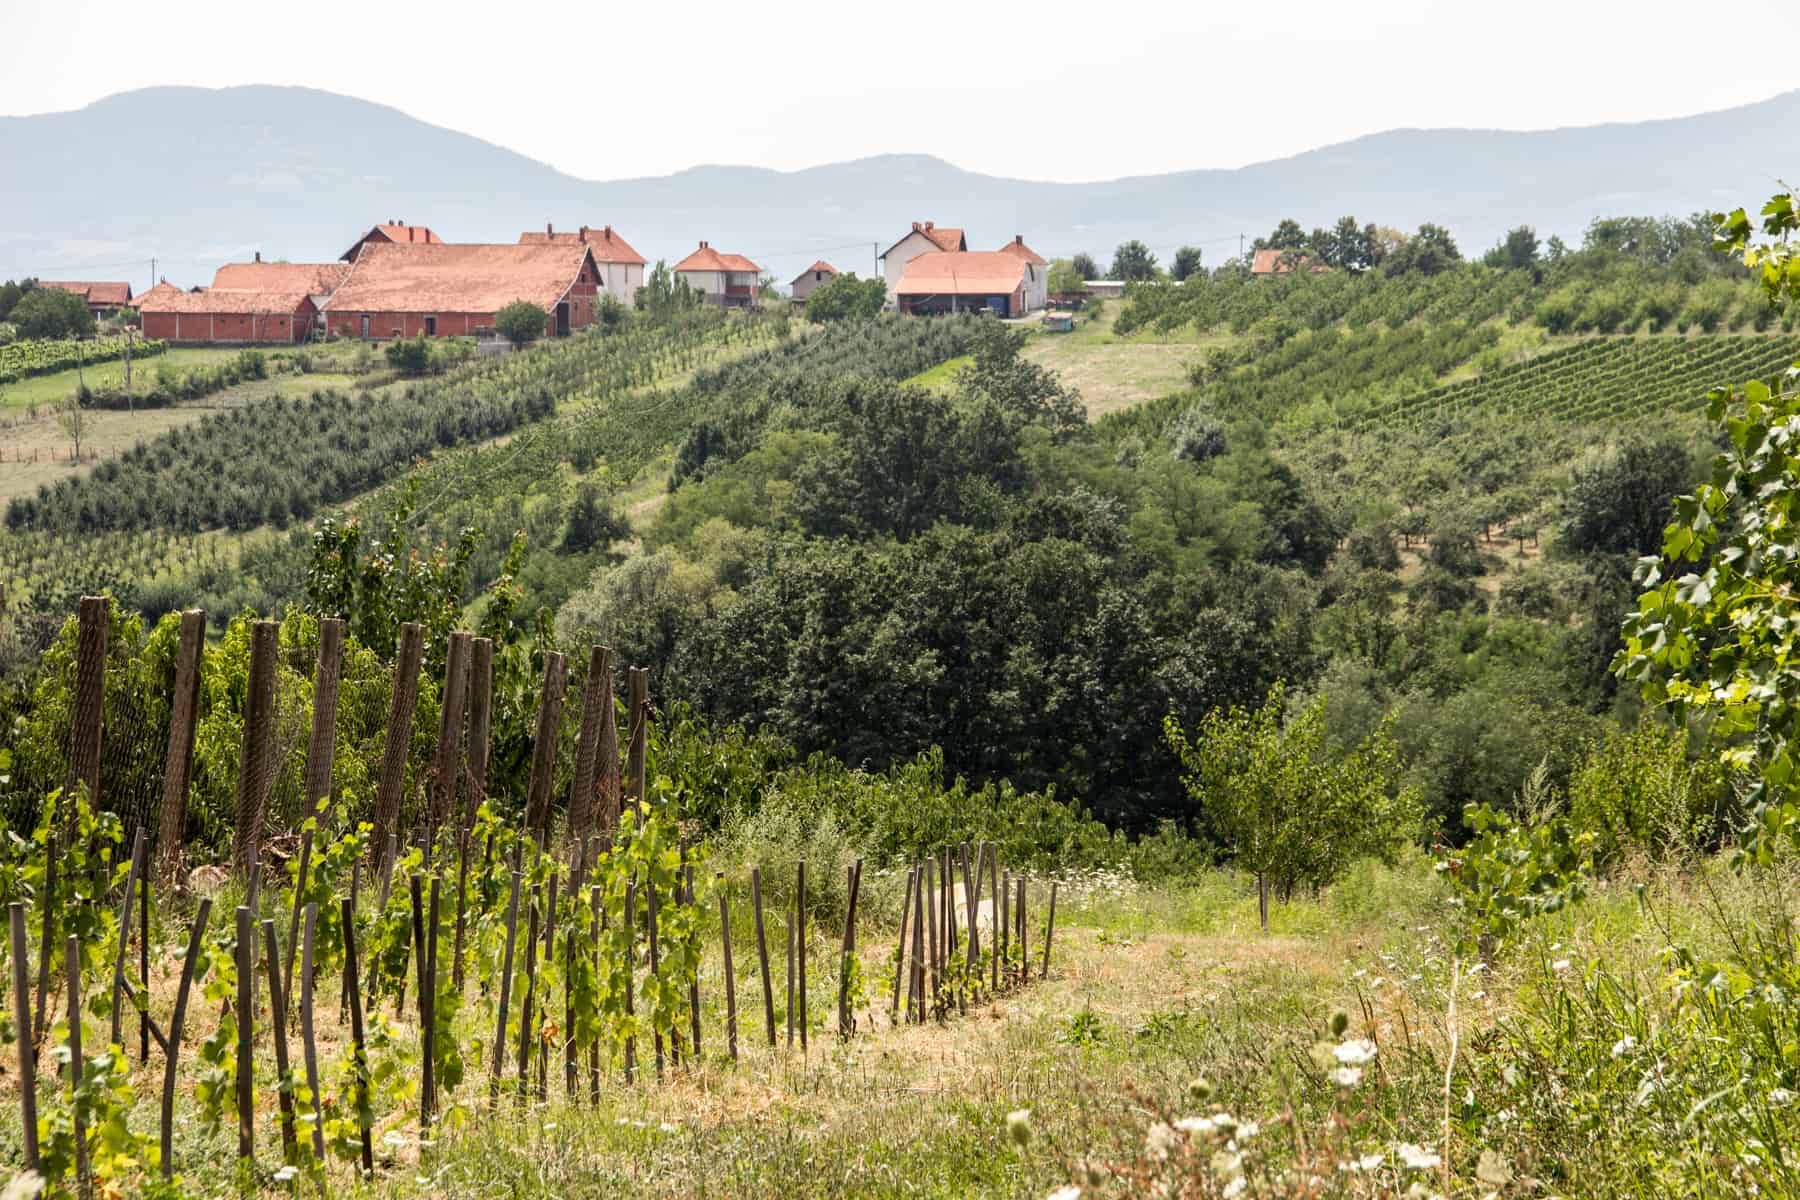 The green sloping rows of vines, backed by orange buildings in Serbia's wine region of Topola. 